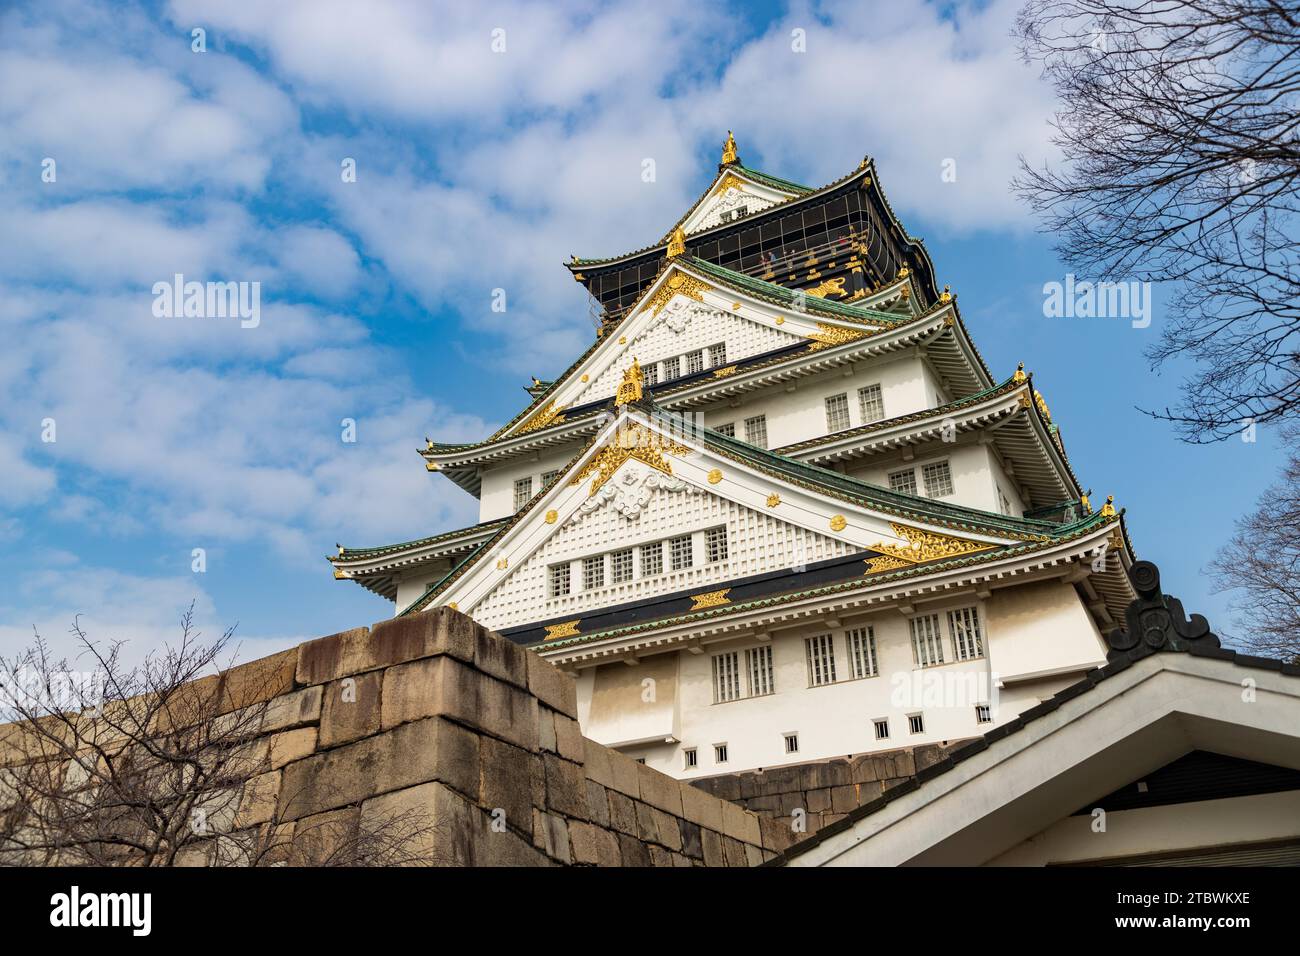 A picture of the Osaka Castle and taken from the square below Stock Photo